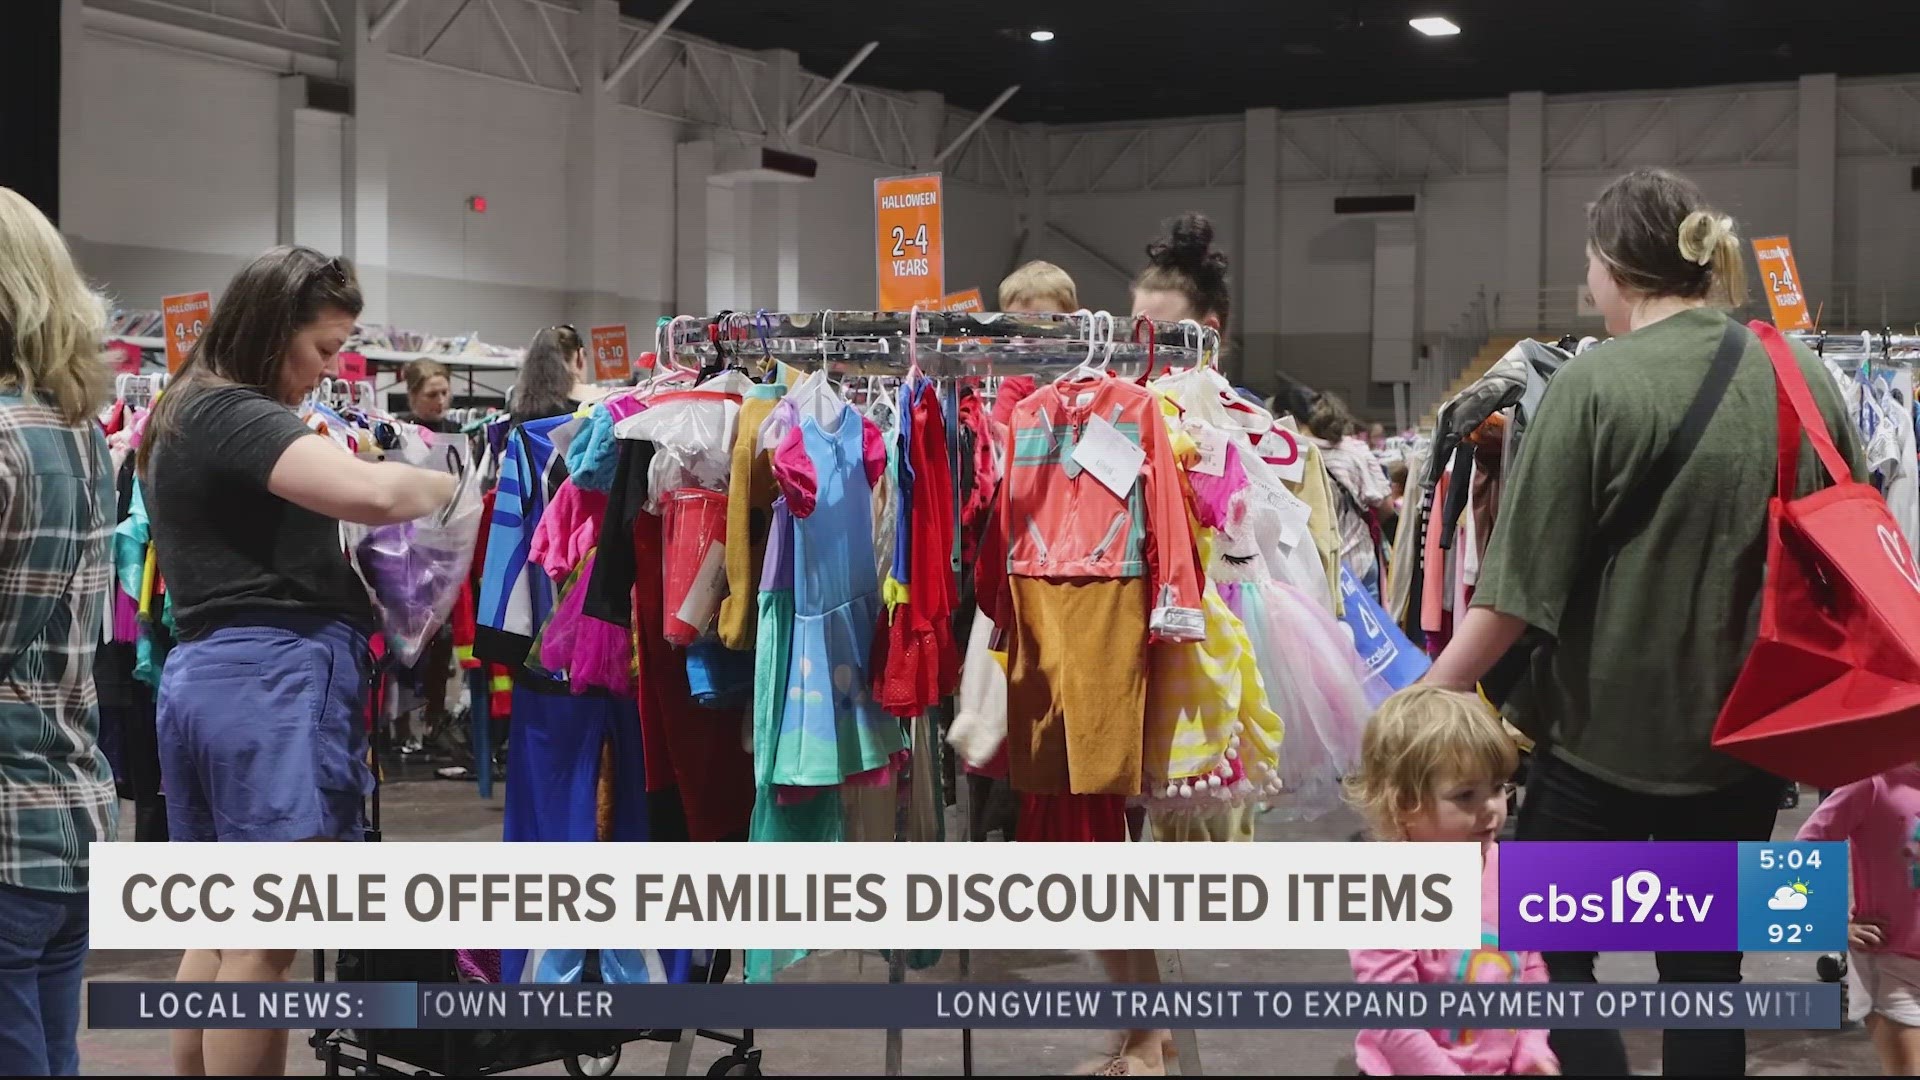 Semi-annual CCC sale offers discounted items for East Texas families